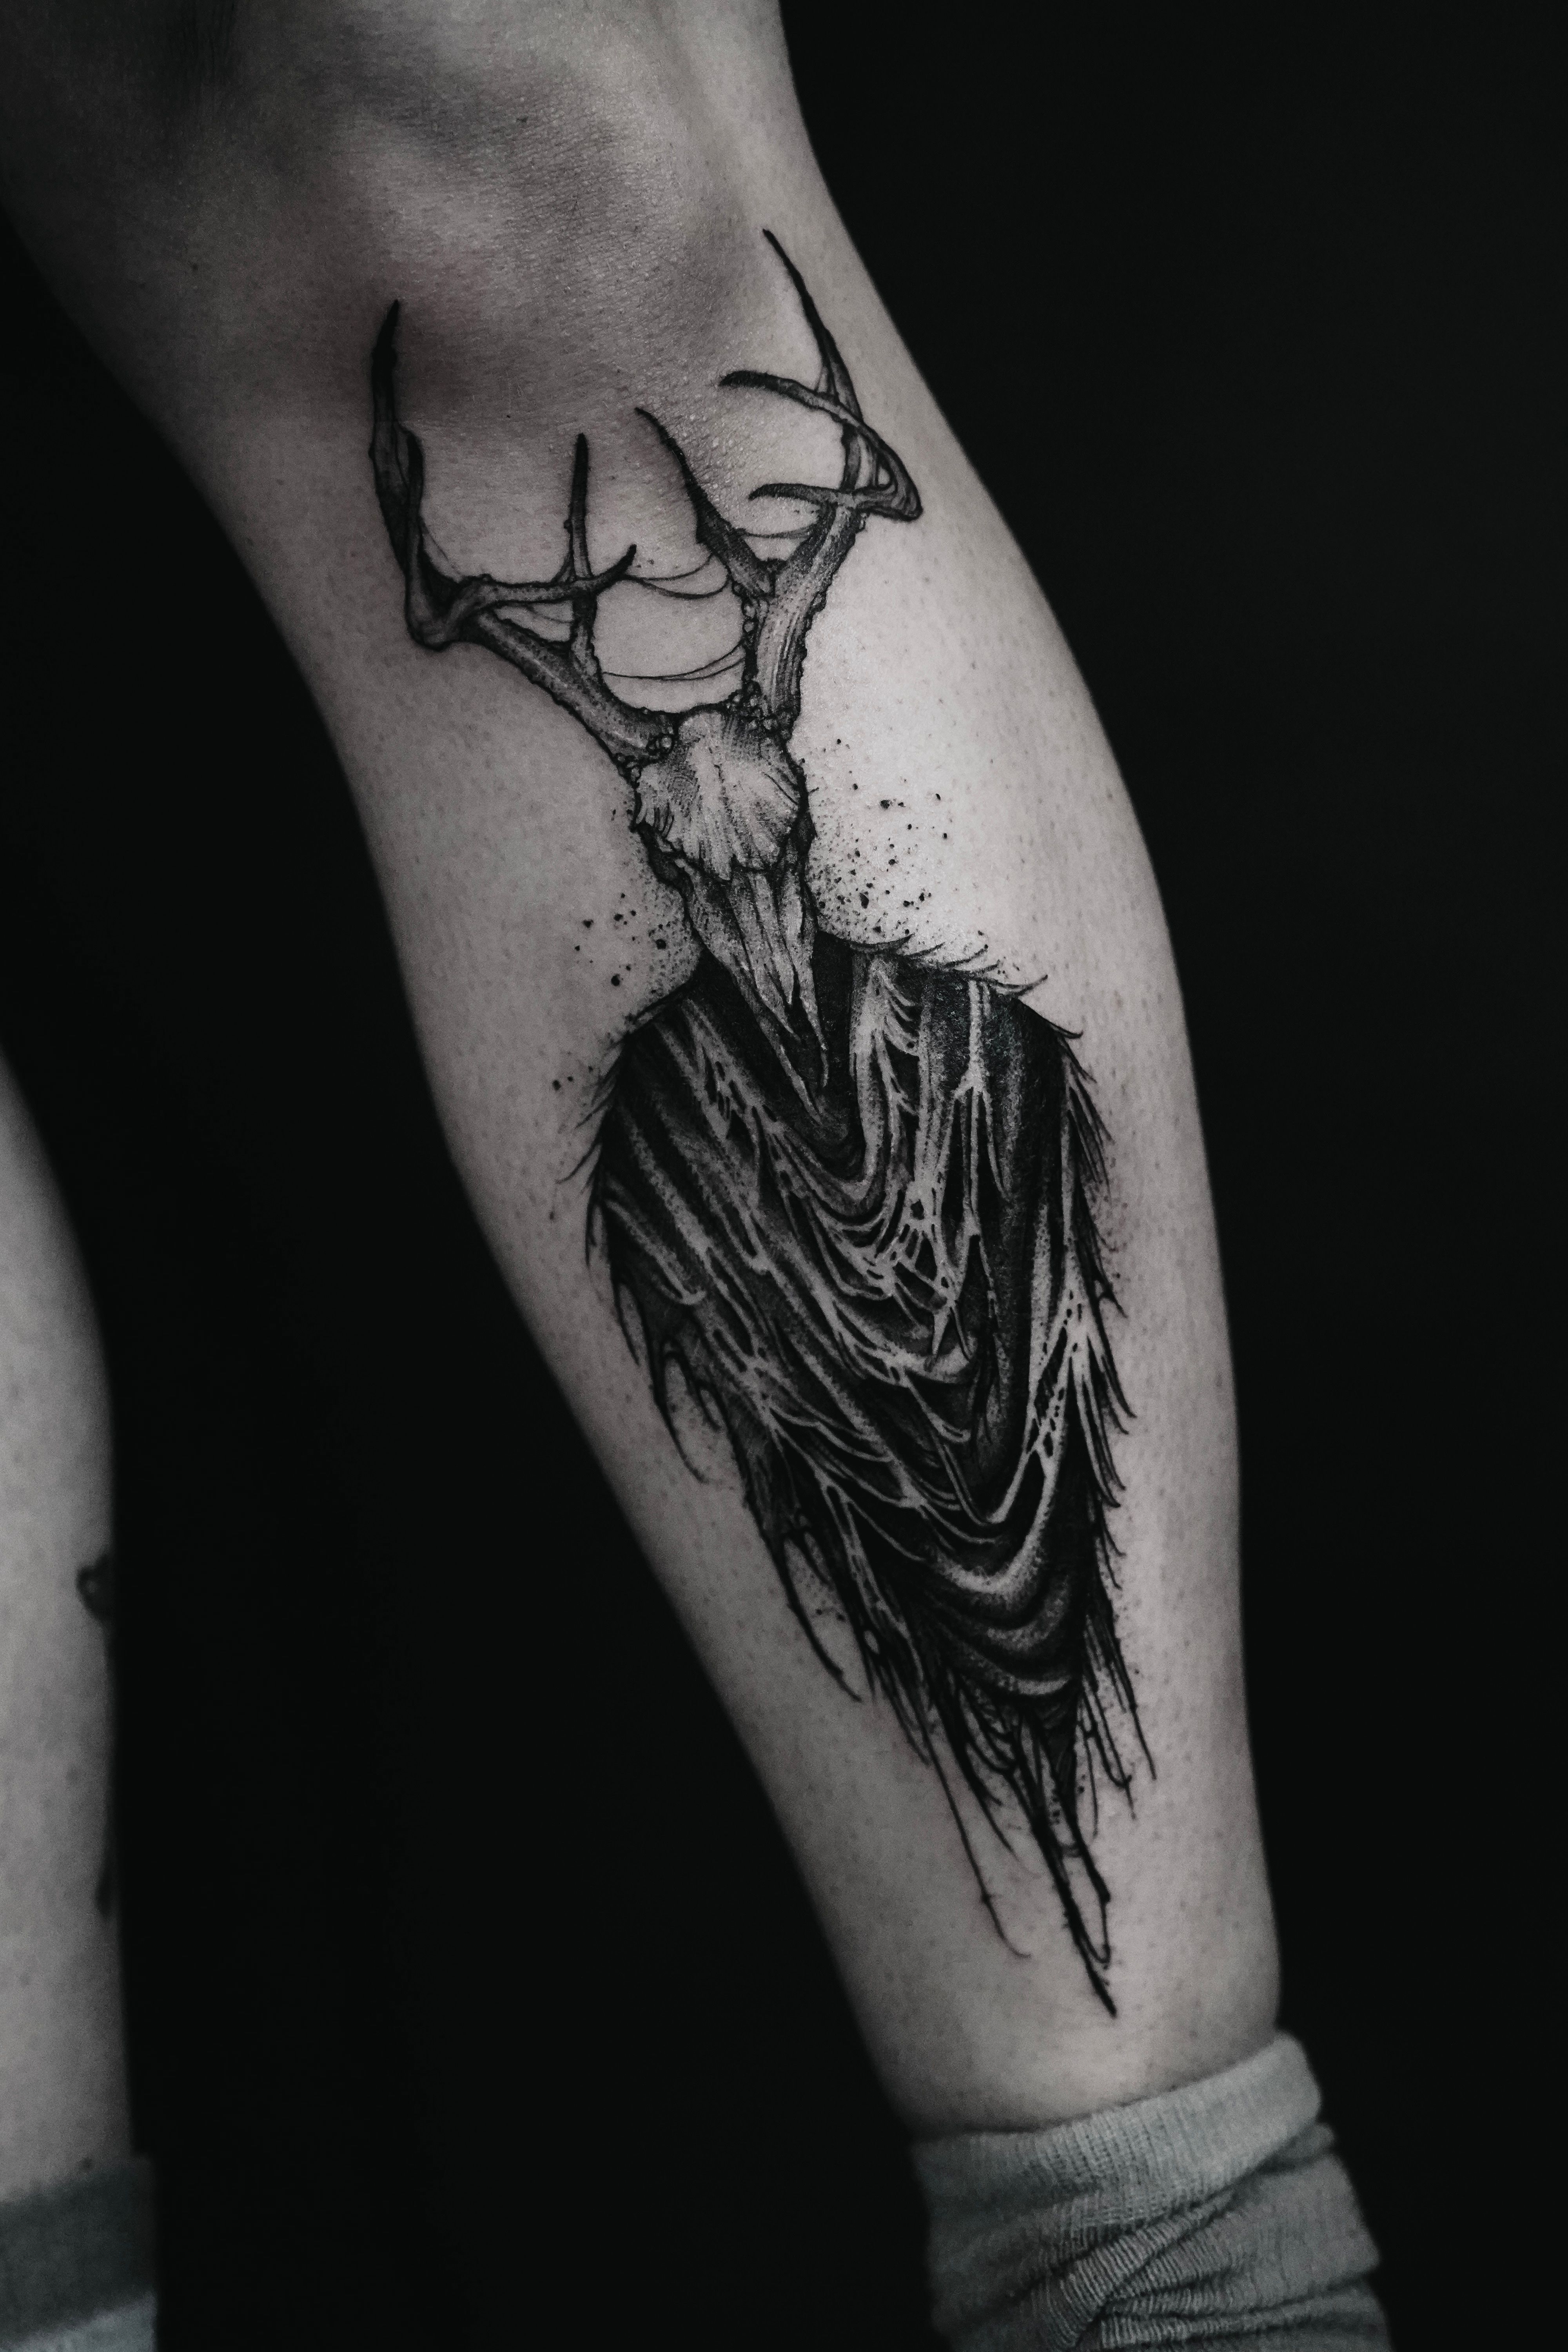 30+ Deer Skull Tattoo Designs, Ideas, and Meanings | Deer skull tattoos, Skull  tattoos, Skull tattoo